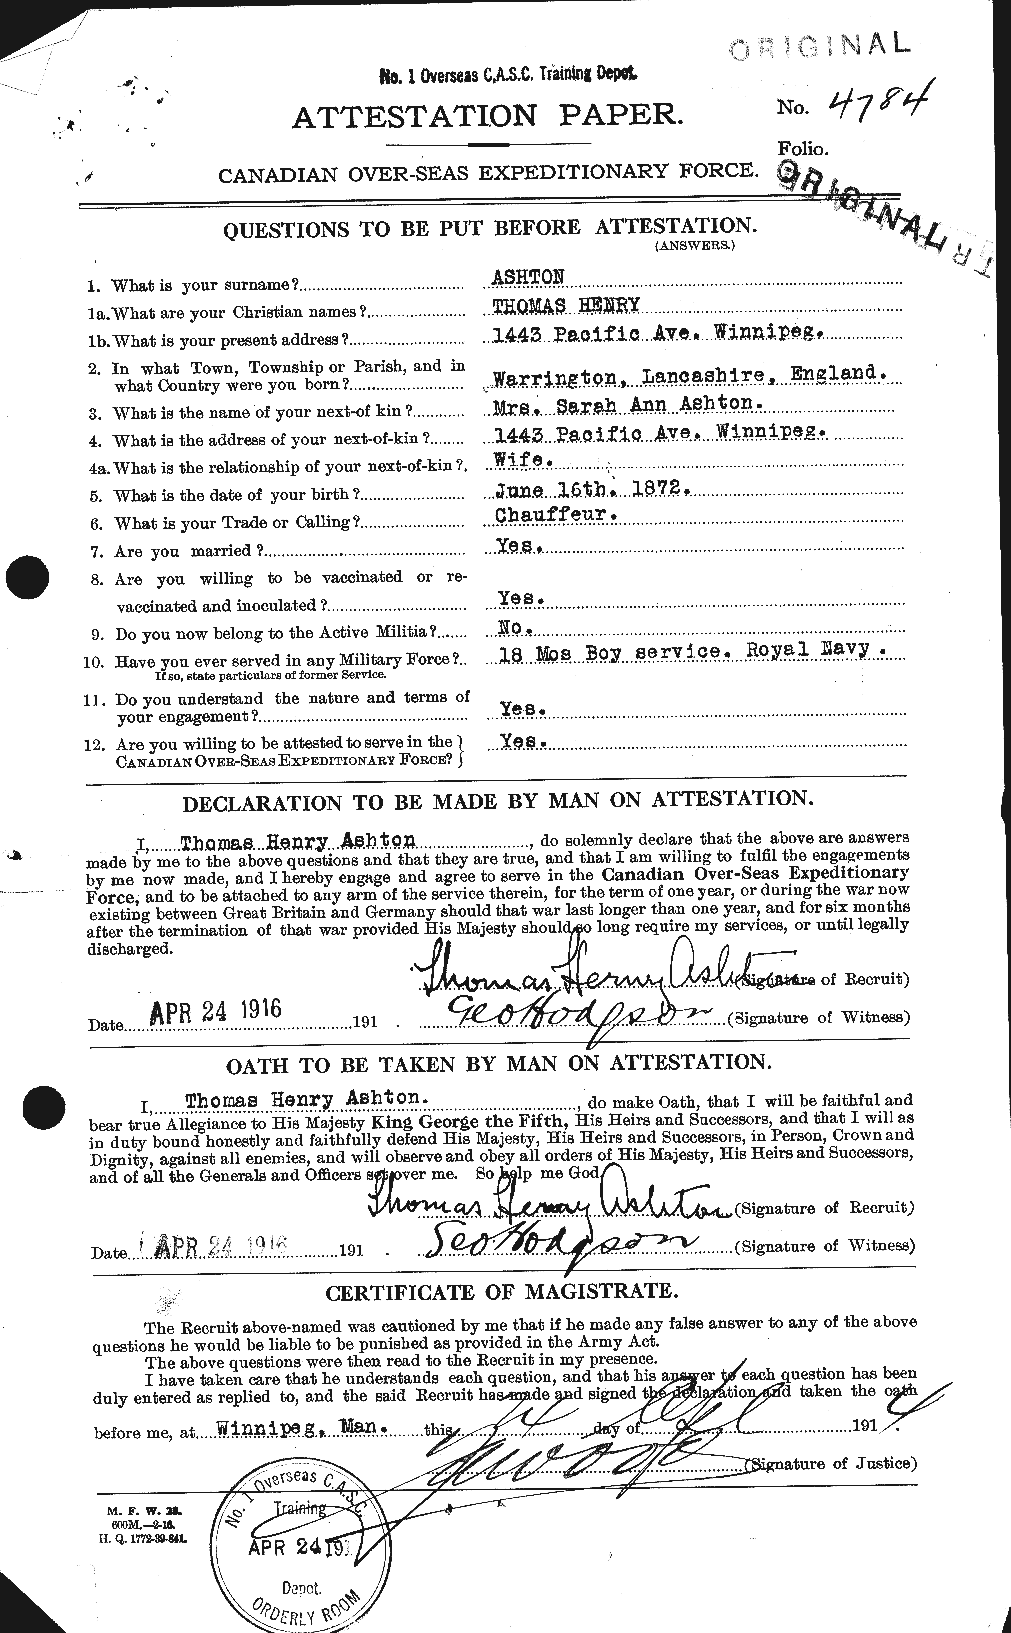 Personnel Records of the First World War - CEF 223800a